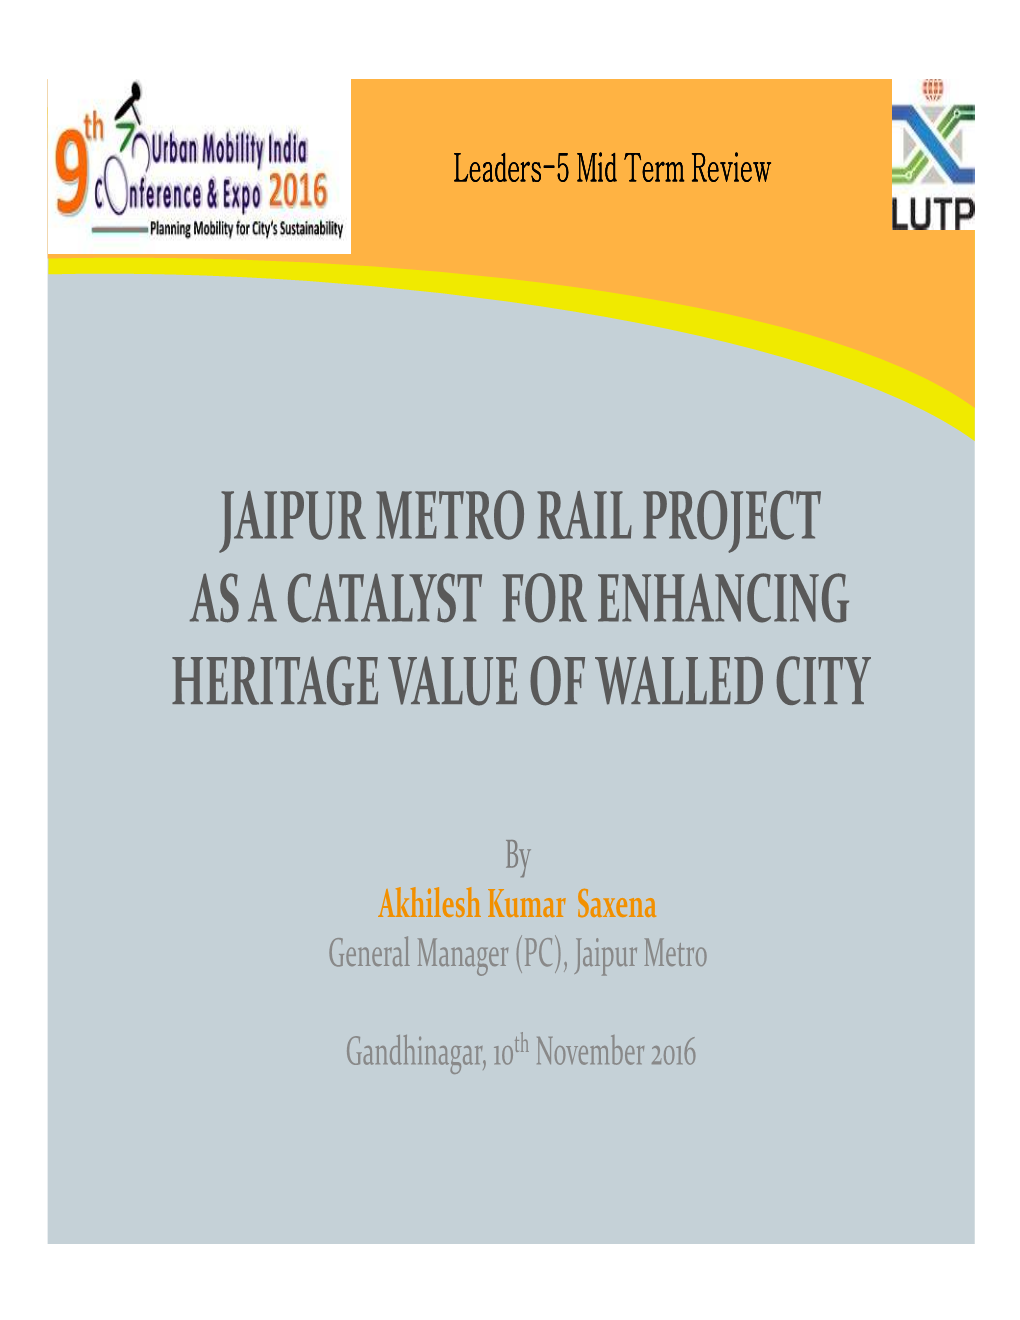 Jaipur Metro Rail Project As a Catalyst for Enhancing Heritage Value of Walled City